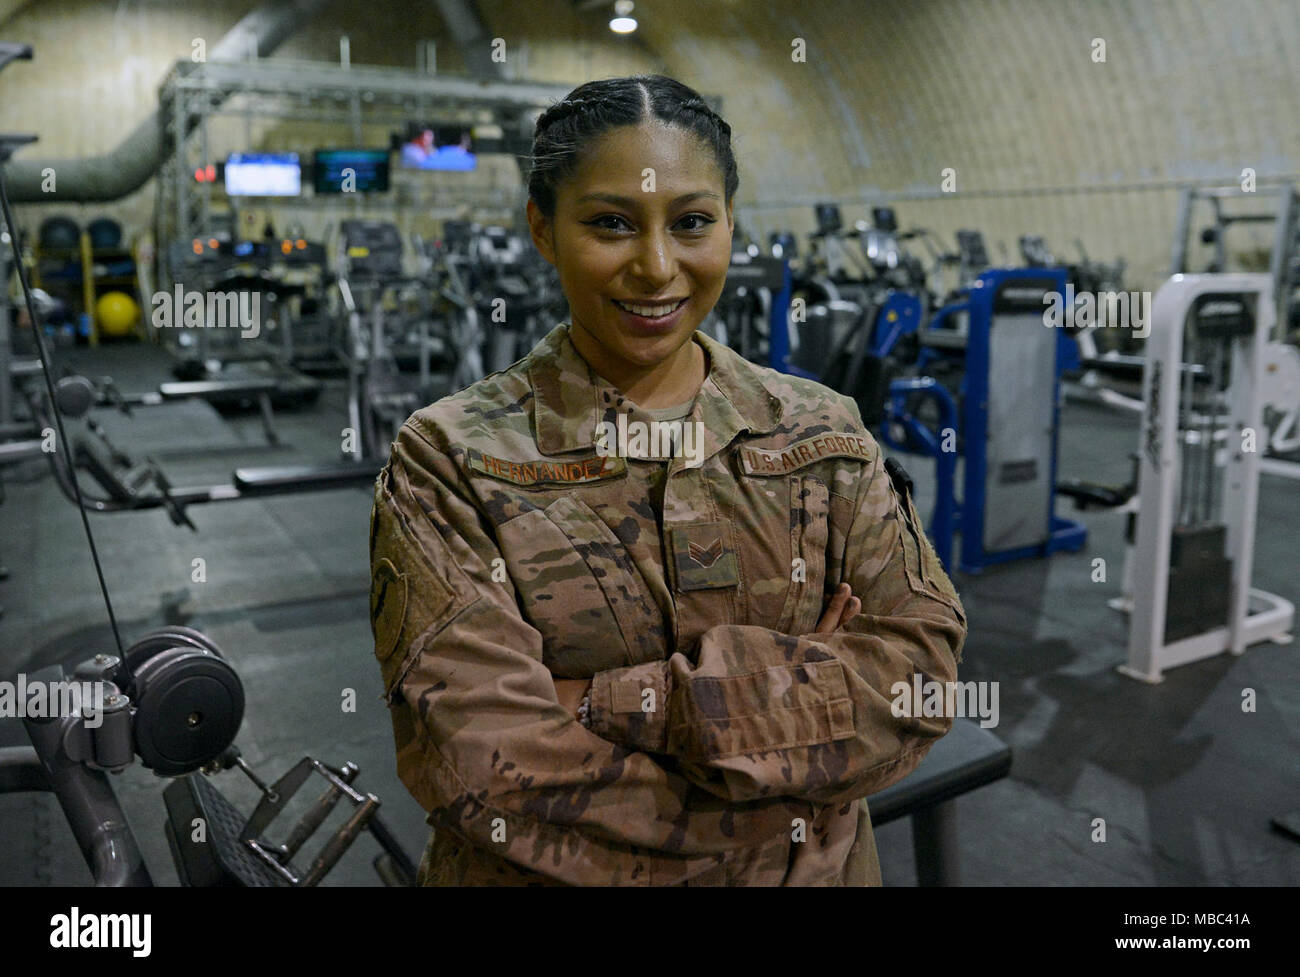 Senior Airman Astrid Hernandez, 455th Expeditionary Force Support Squadron contracting officer representative, poses for a photo in The Rock fitness center Feb. 13, 2018 at Bagram Airfield, Afghanistan. Hailing from Oregon, Hernandez is currently deployed from Mountain Home Air Force Base, Idaho and has been in the Air Force for 3 years. Stock Photo